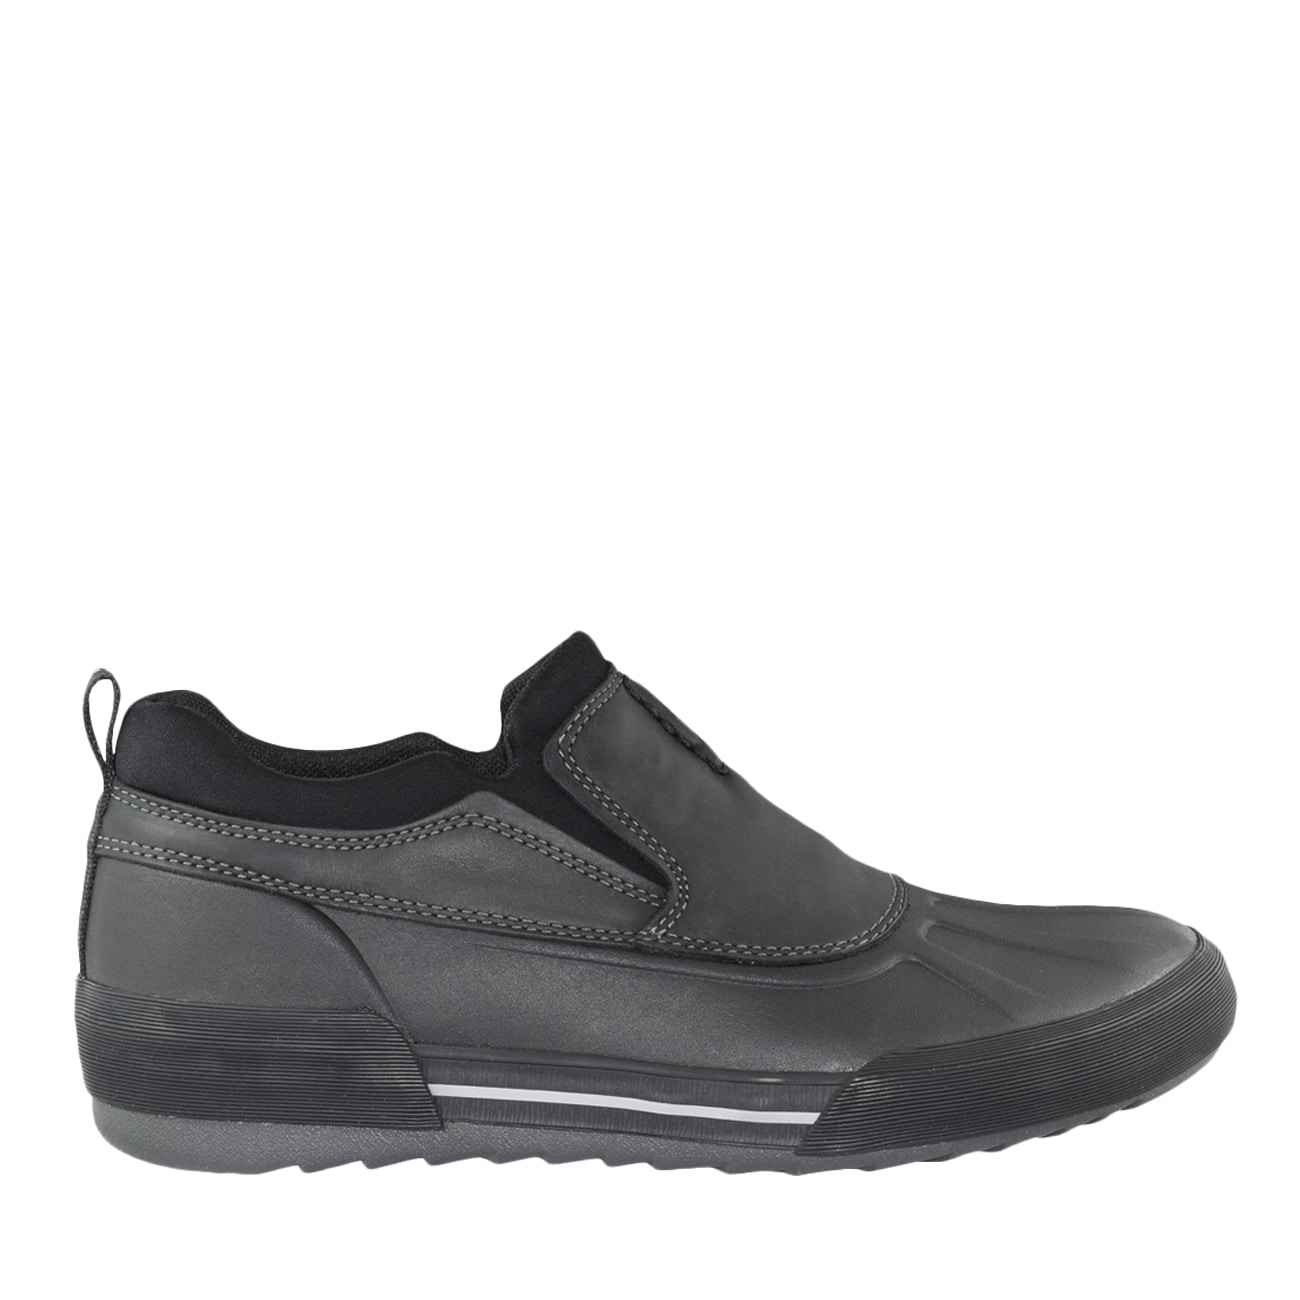 Collection by Clarks Waterproof Bowman Free Slip-On | Shoe Warehouse